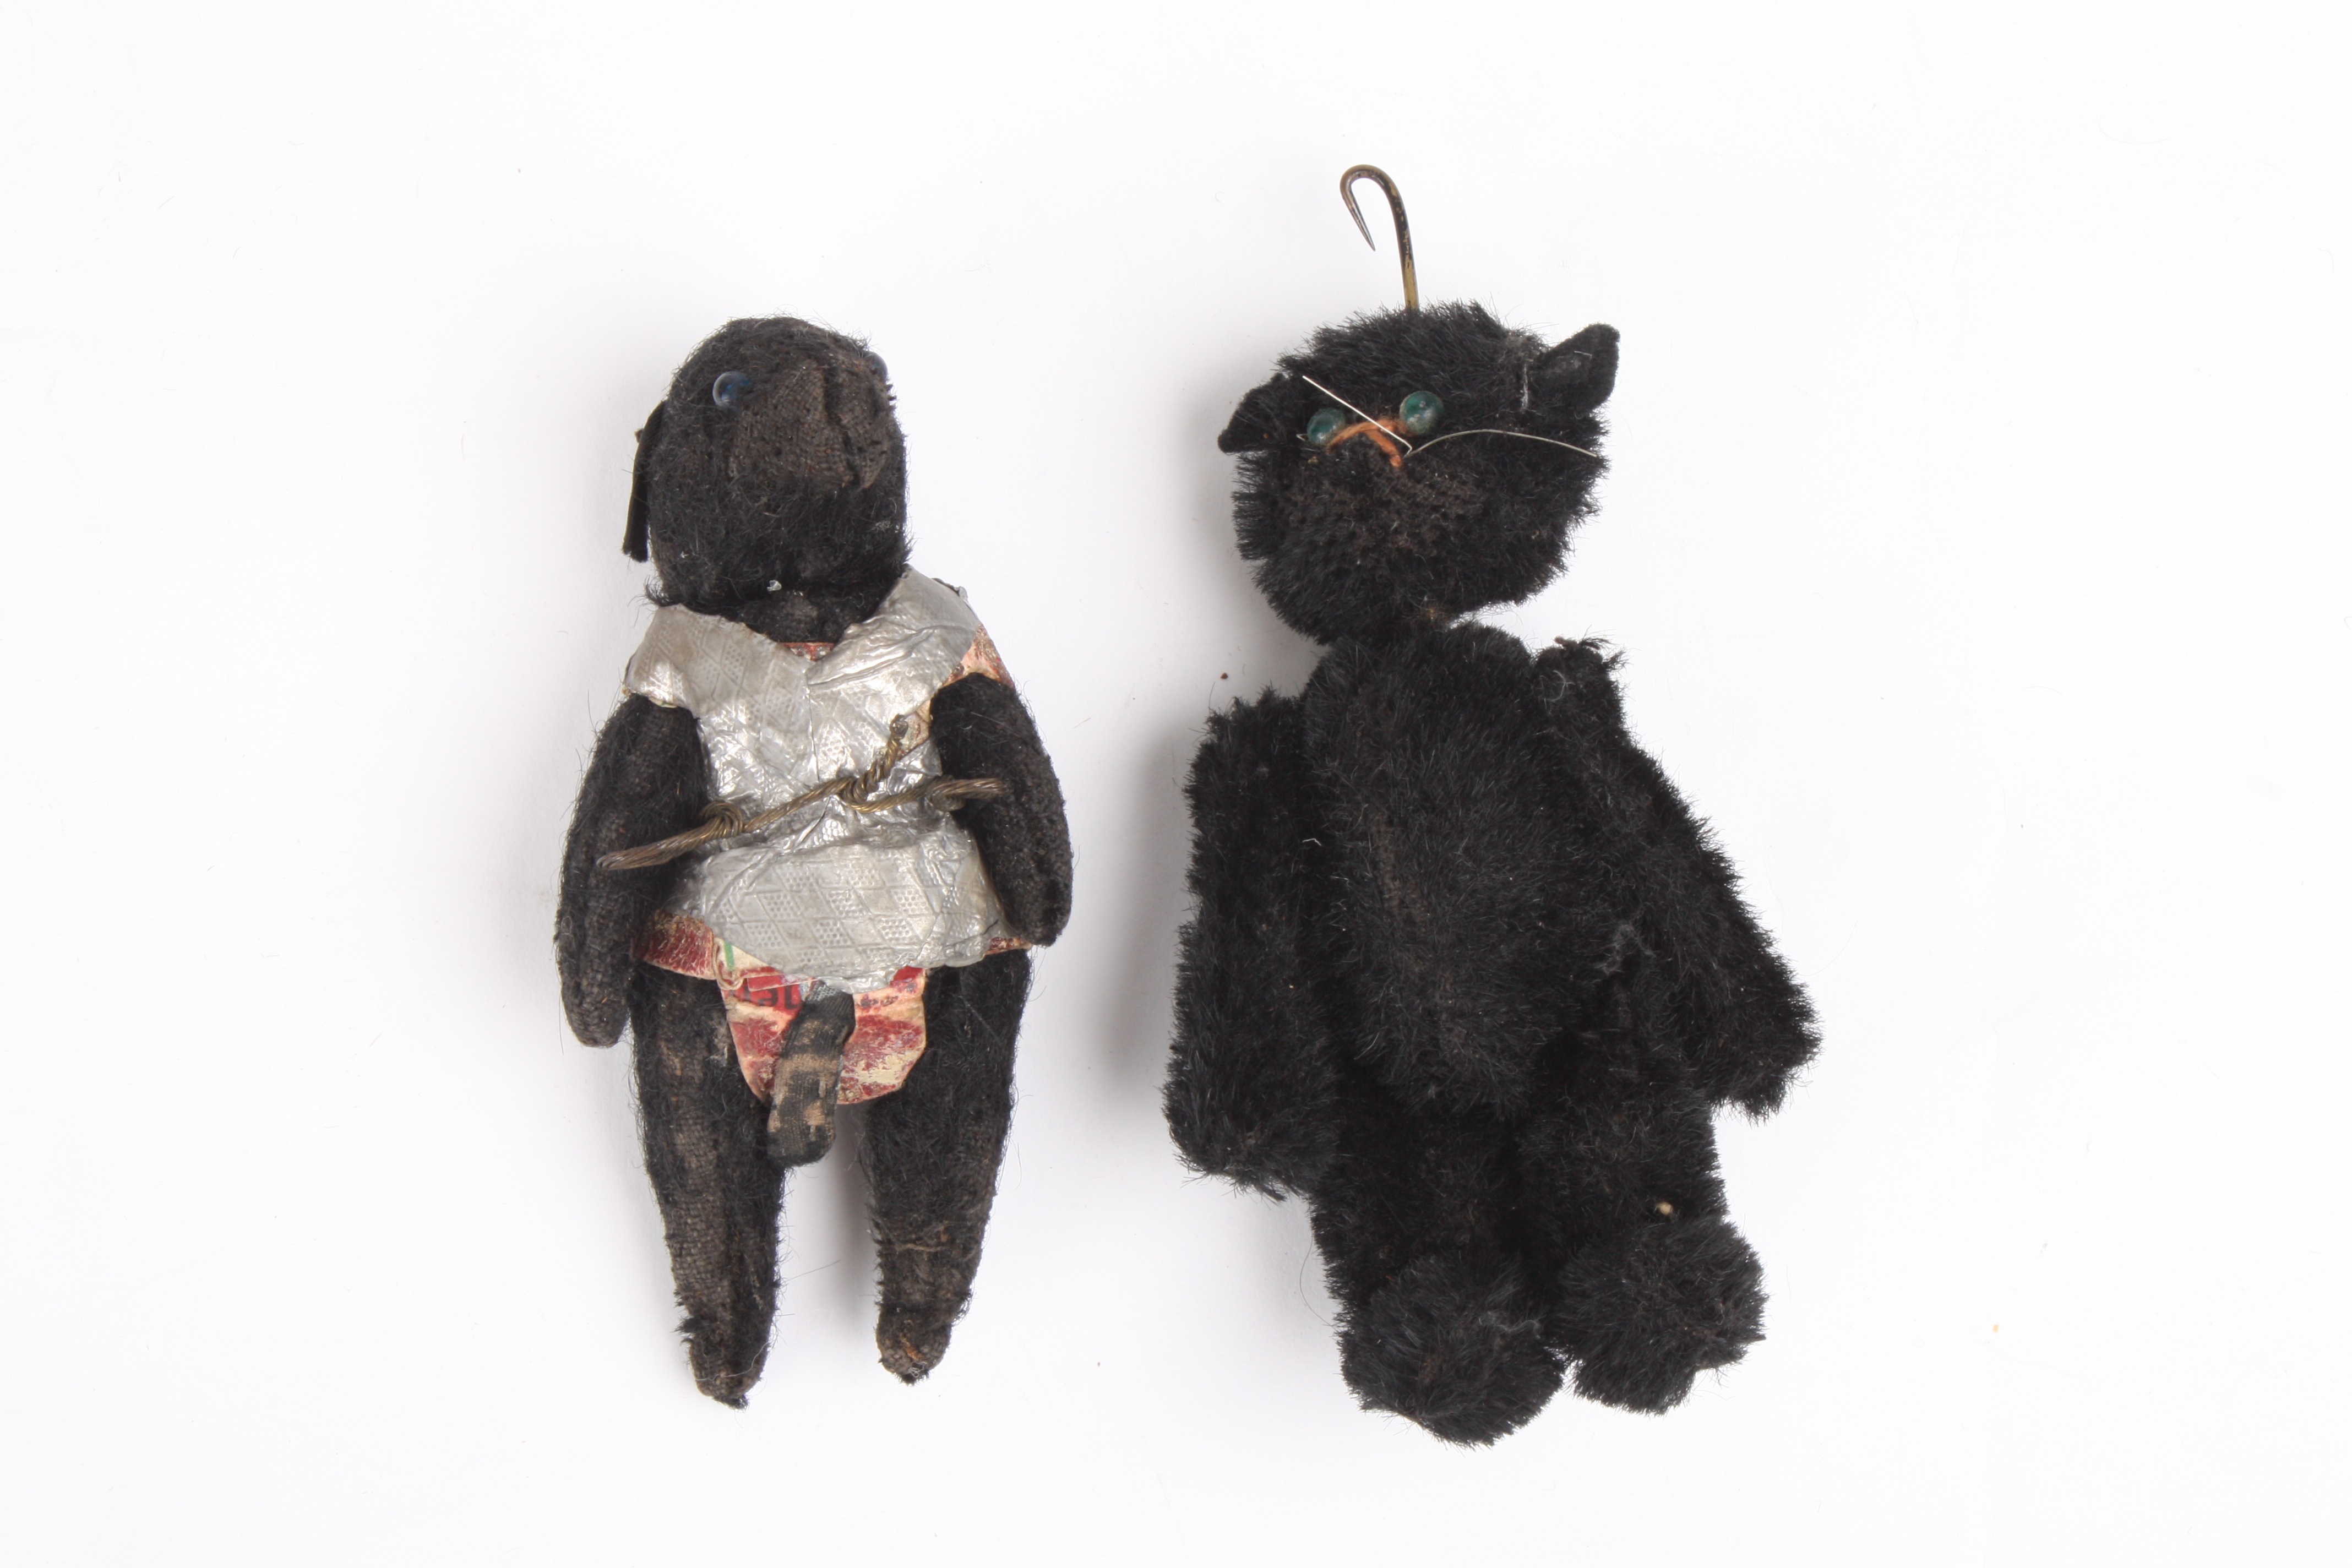 Two Schuco toy bears
both with articulated head, arms and legs.Dimensions: 9.5 and 9 cm long.